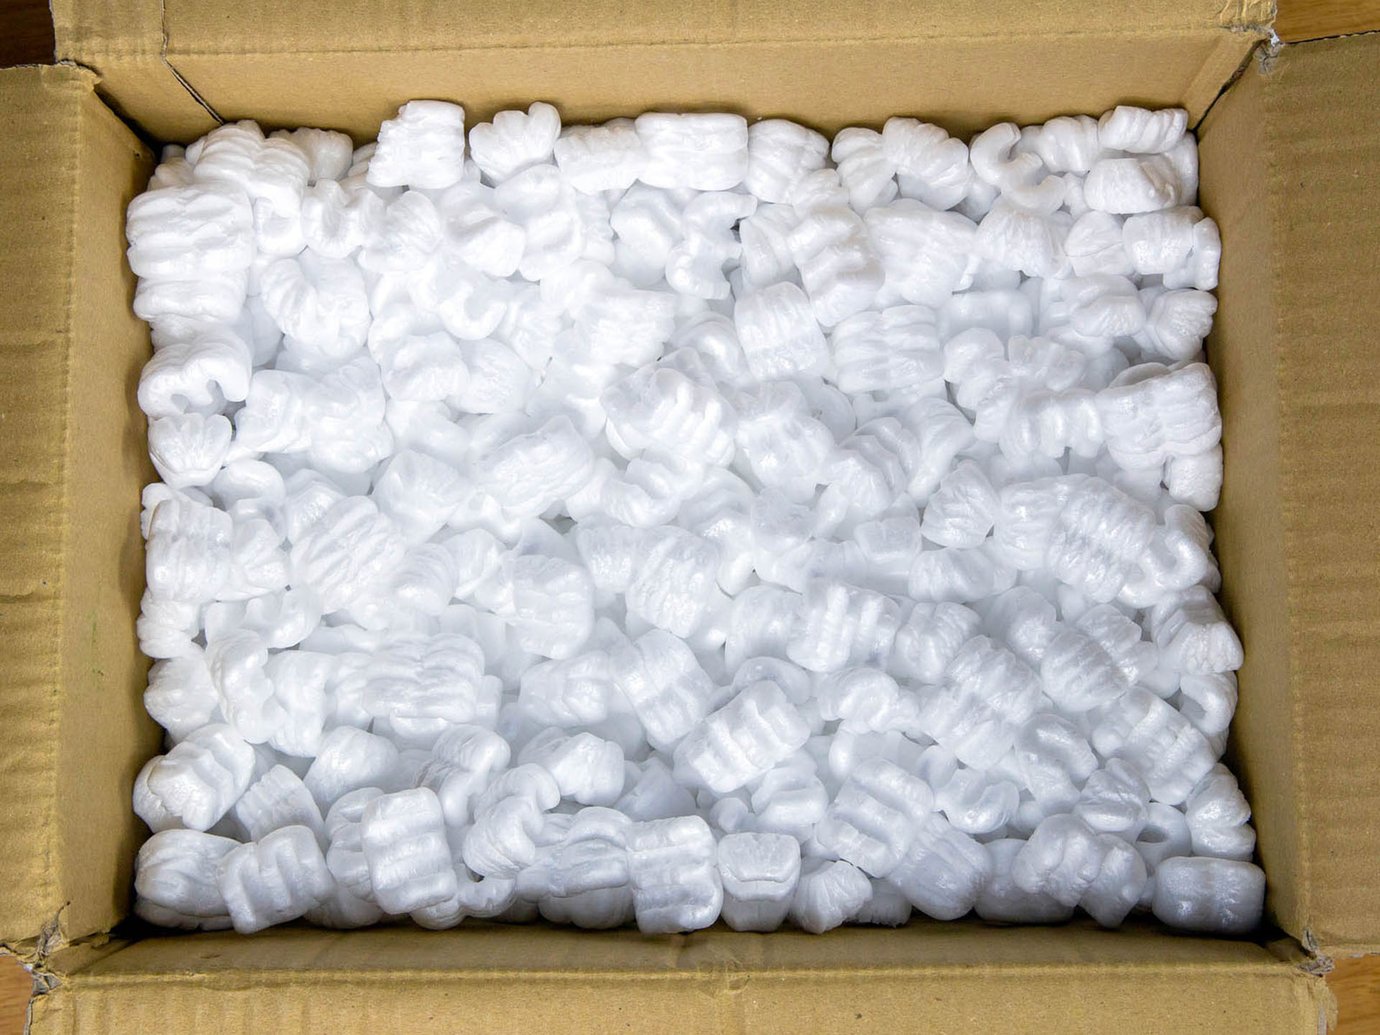 cardboard box filled with styrofoam packing peanuts